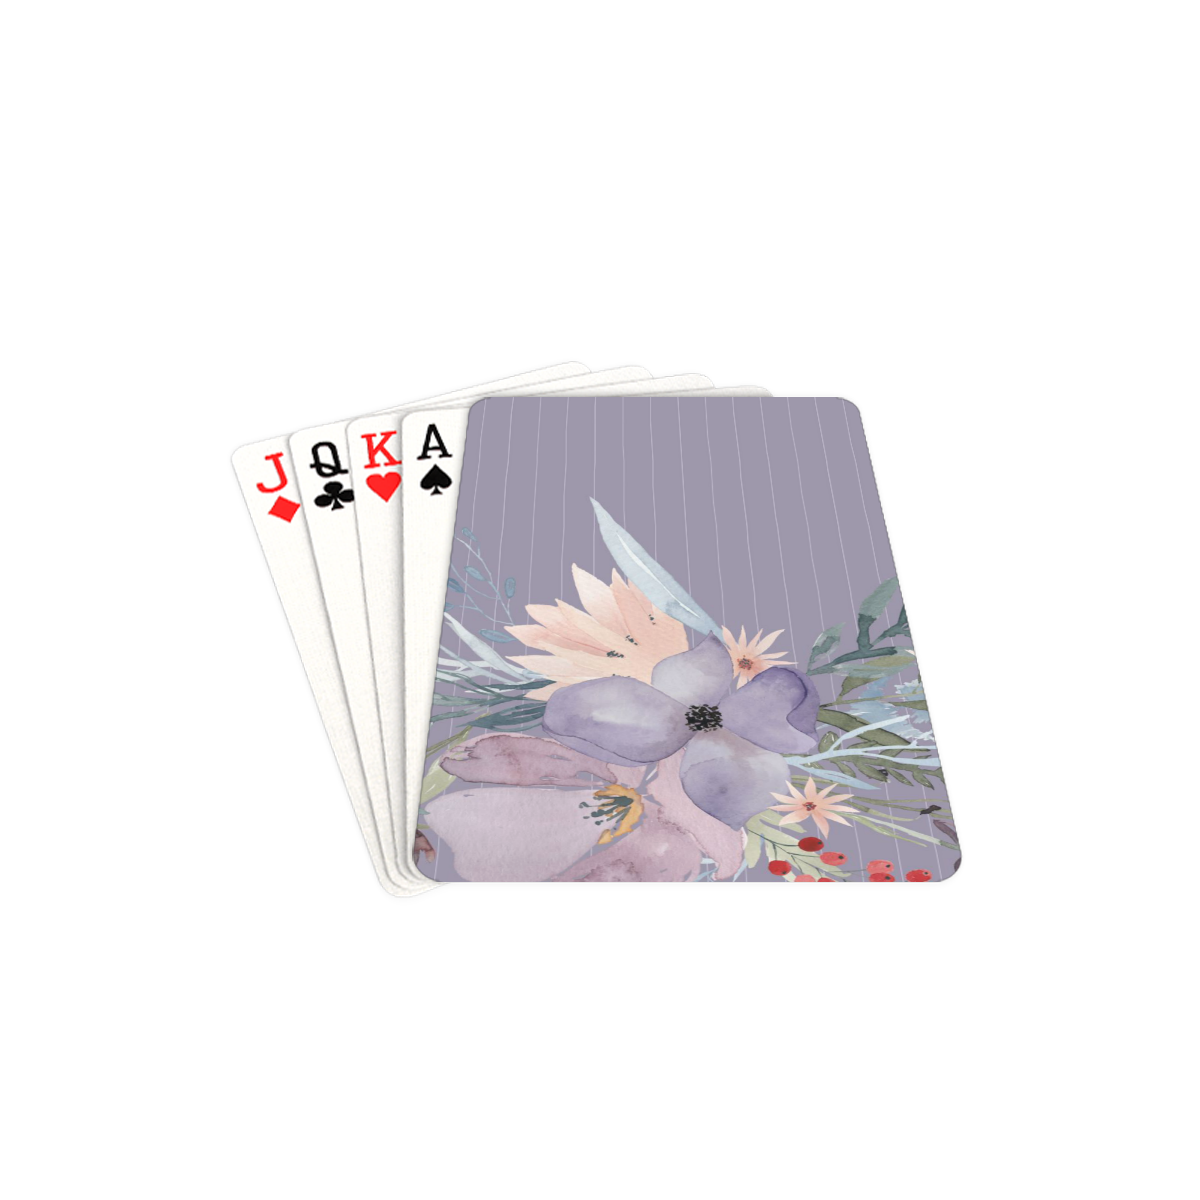 Watercolor Flowers on Stripes Playing Cards 2.5"x3.5"